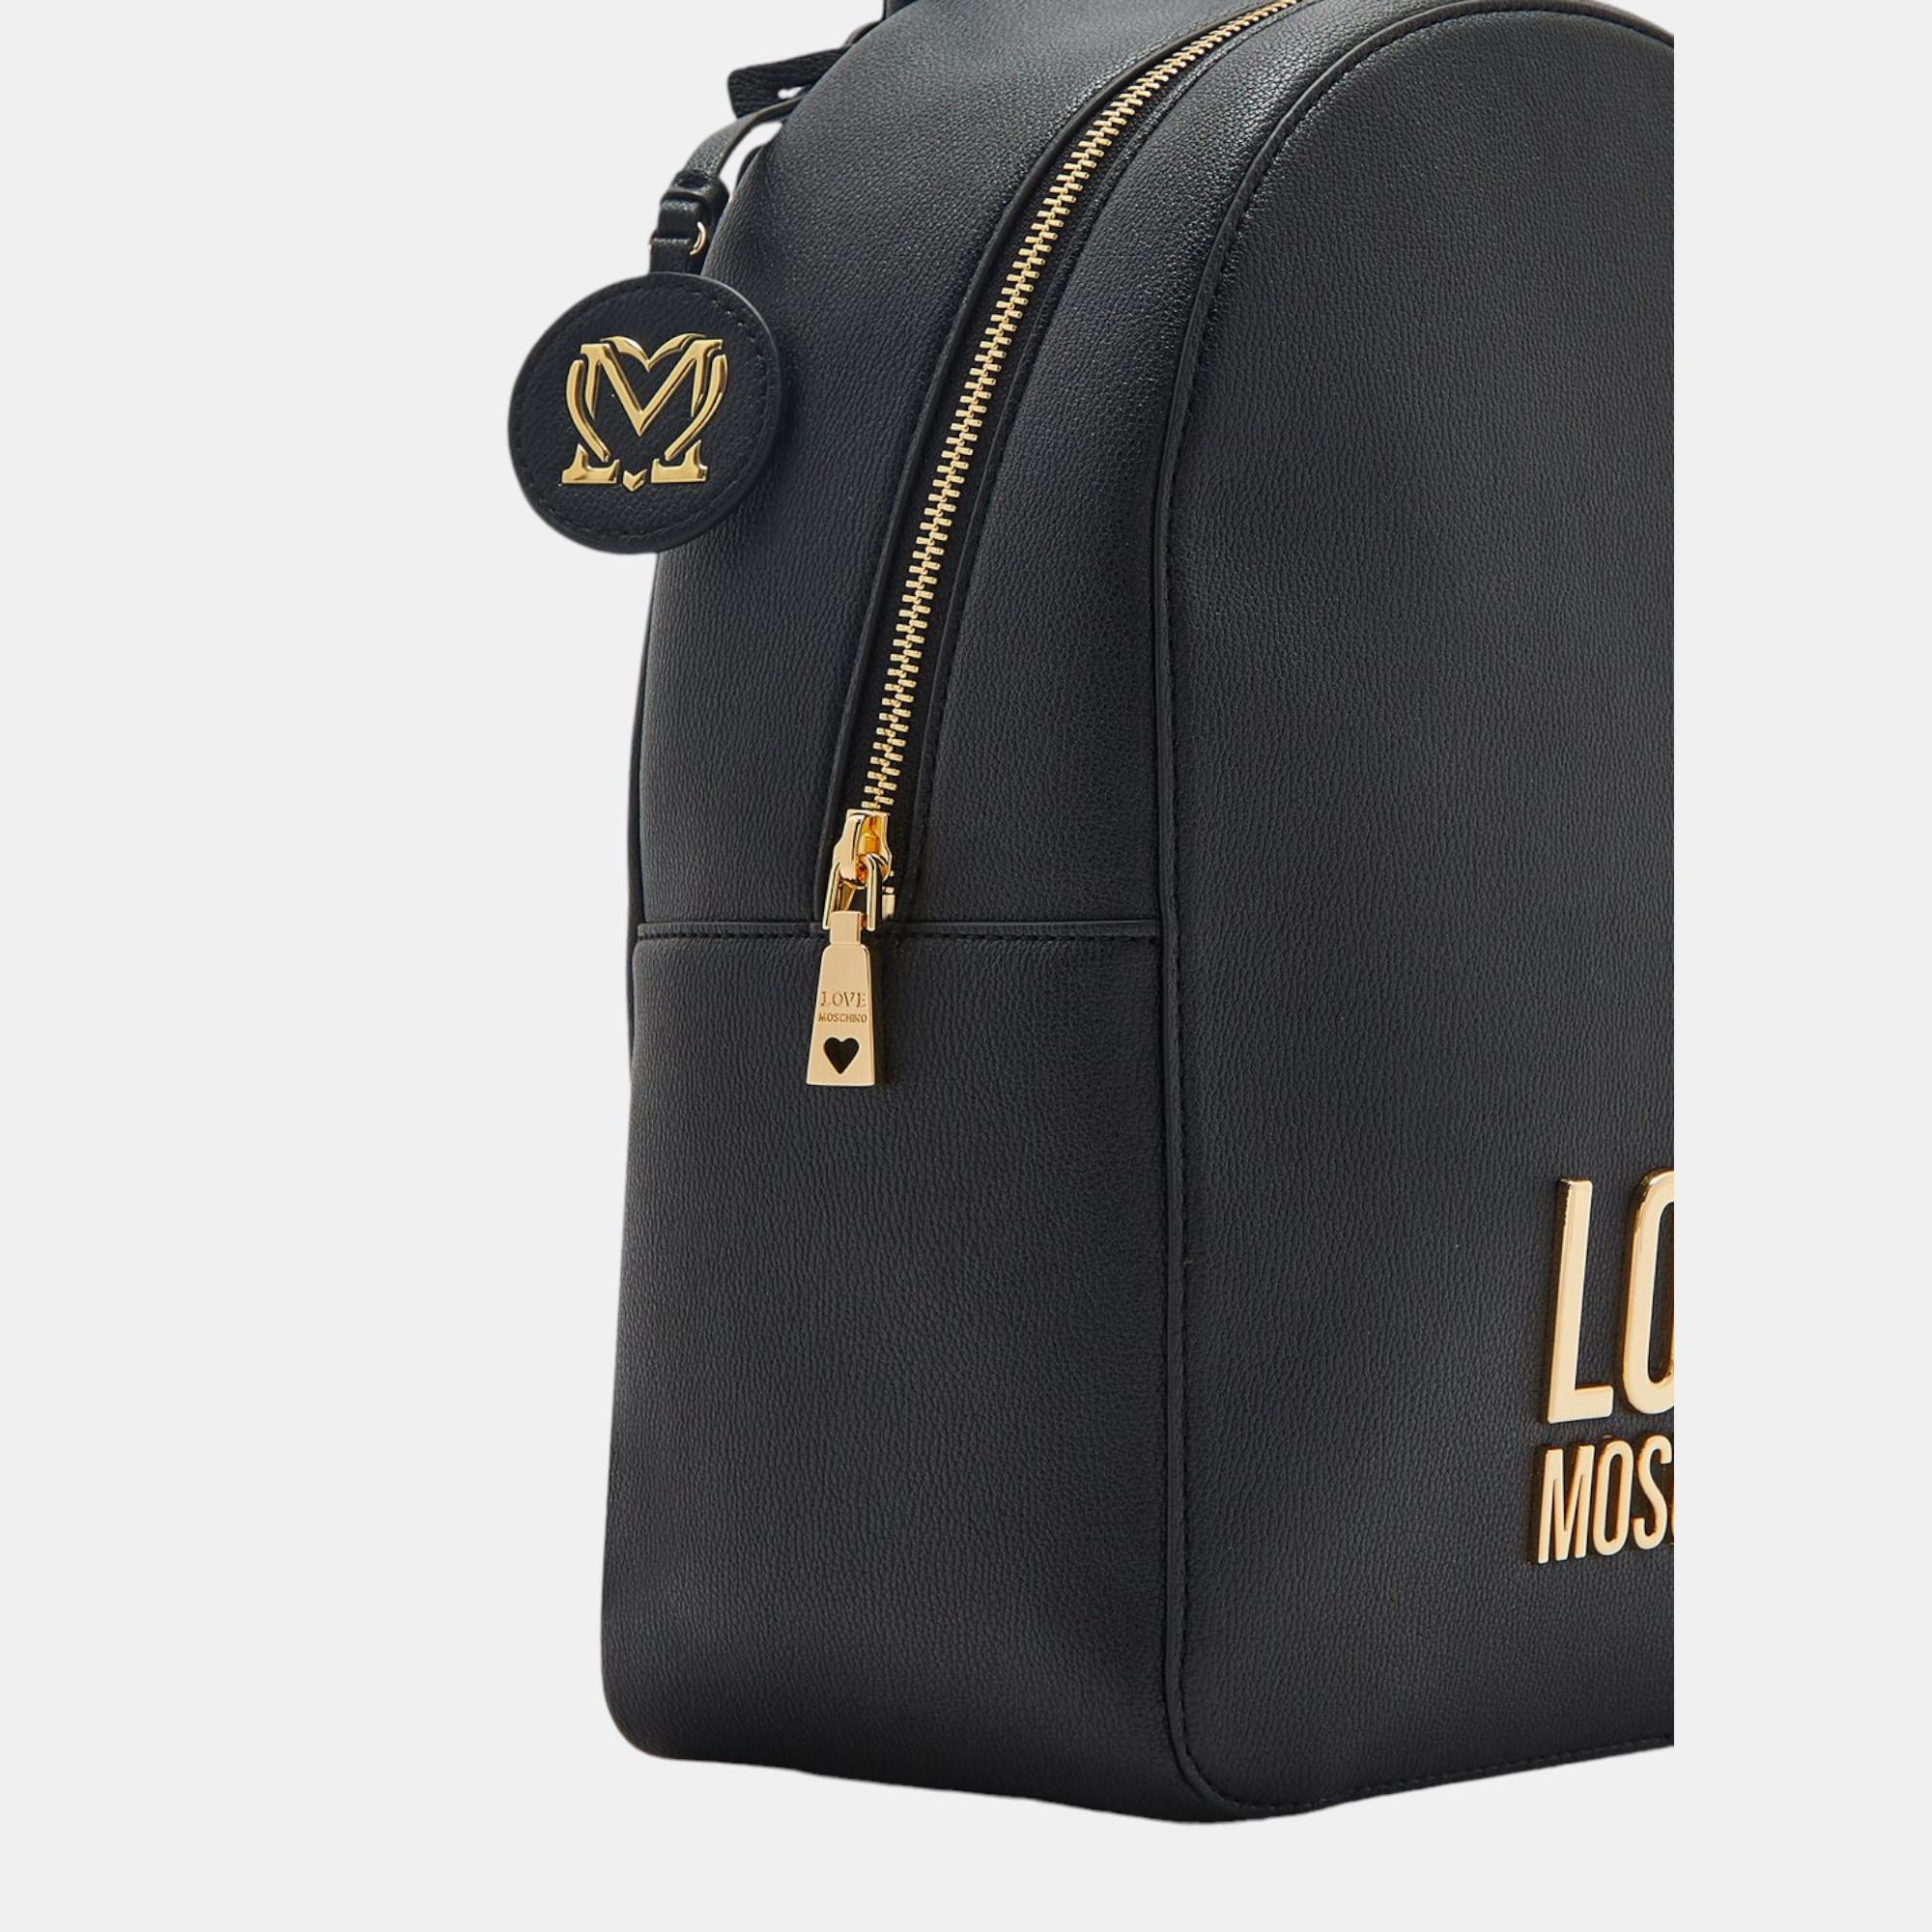 Love Moschino Black Poleyster Backpack